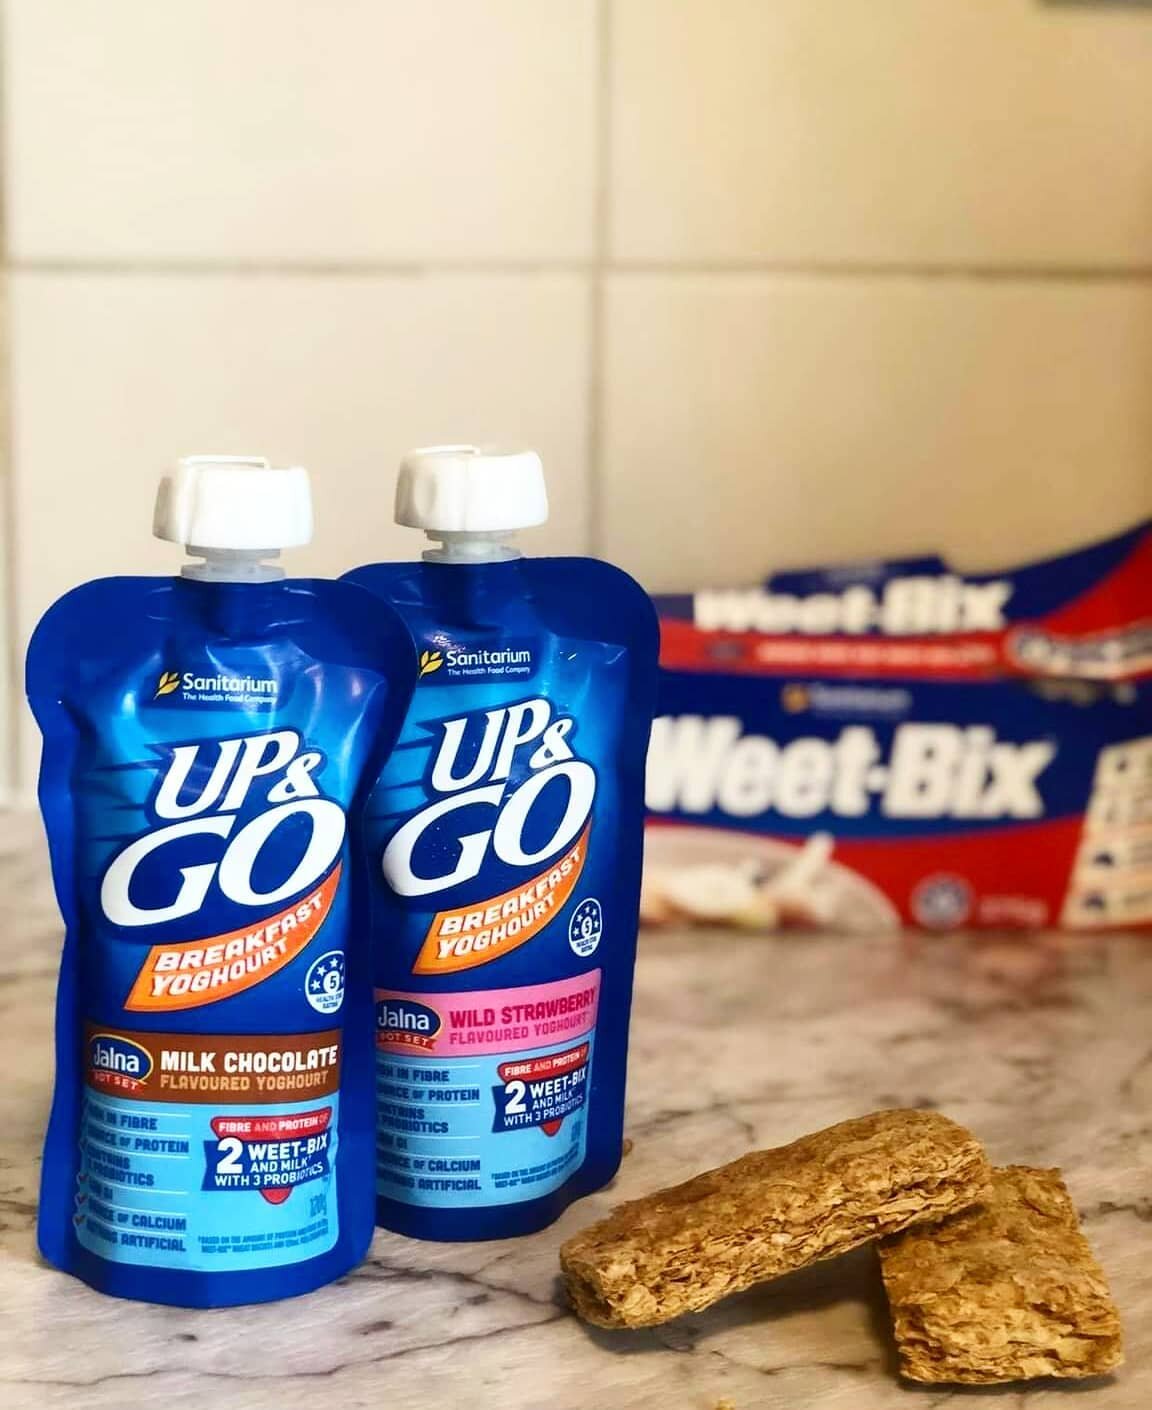 So let&rsquo;s talk about Weetbix...

Overall the product itself is high when it comes to nutritional quality. High in fibre, low sugar and also relatively low in energy per serve..not to mention tasty! 🙌

Now we have come across a product where Wee